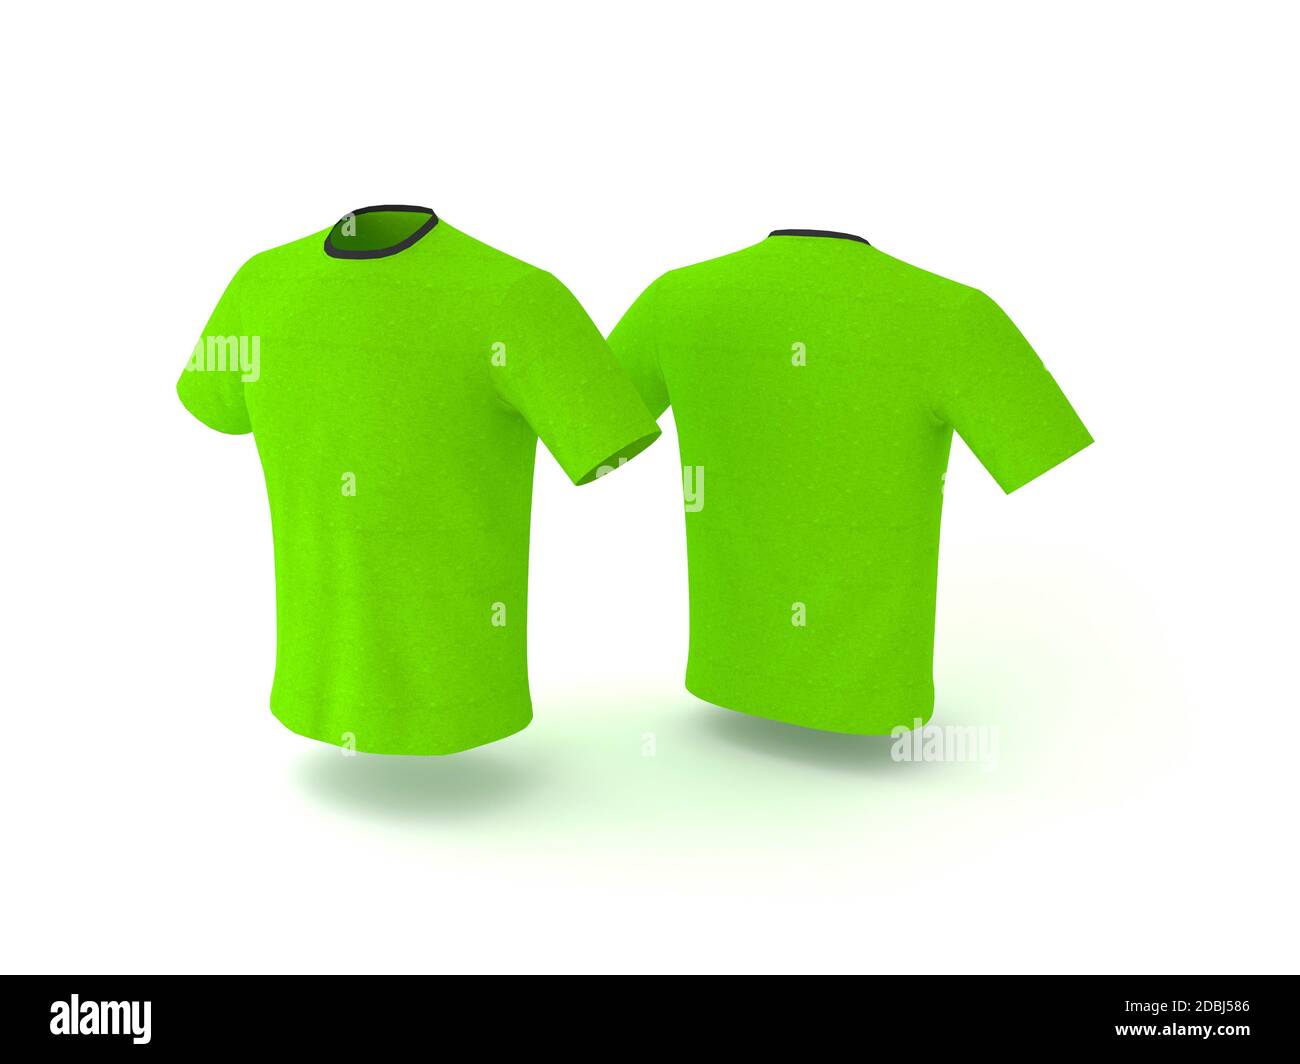 Download Green T Shirt Template Isolated On Background Men S Realistic T Shirt Mockup 3d Render Stock Photo Alamy